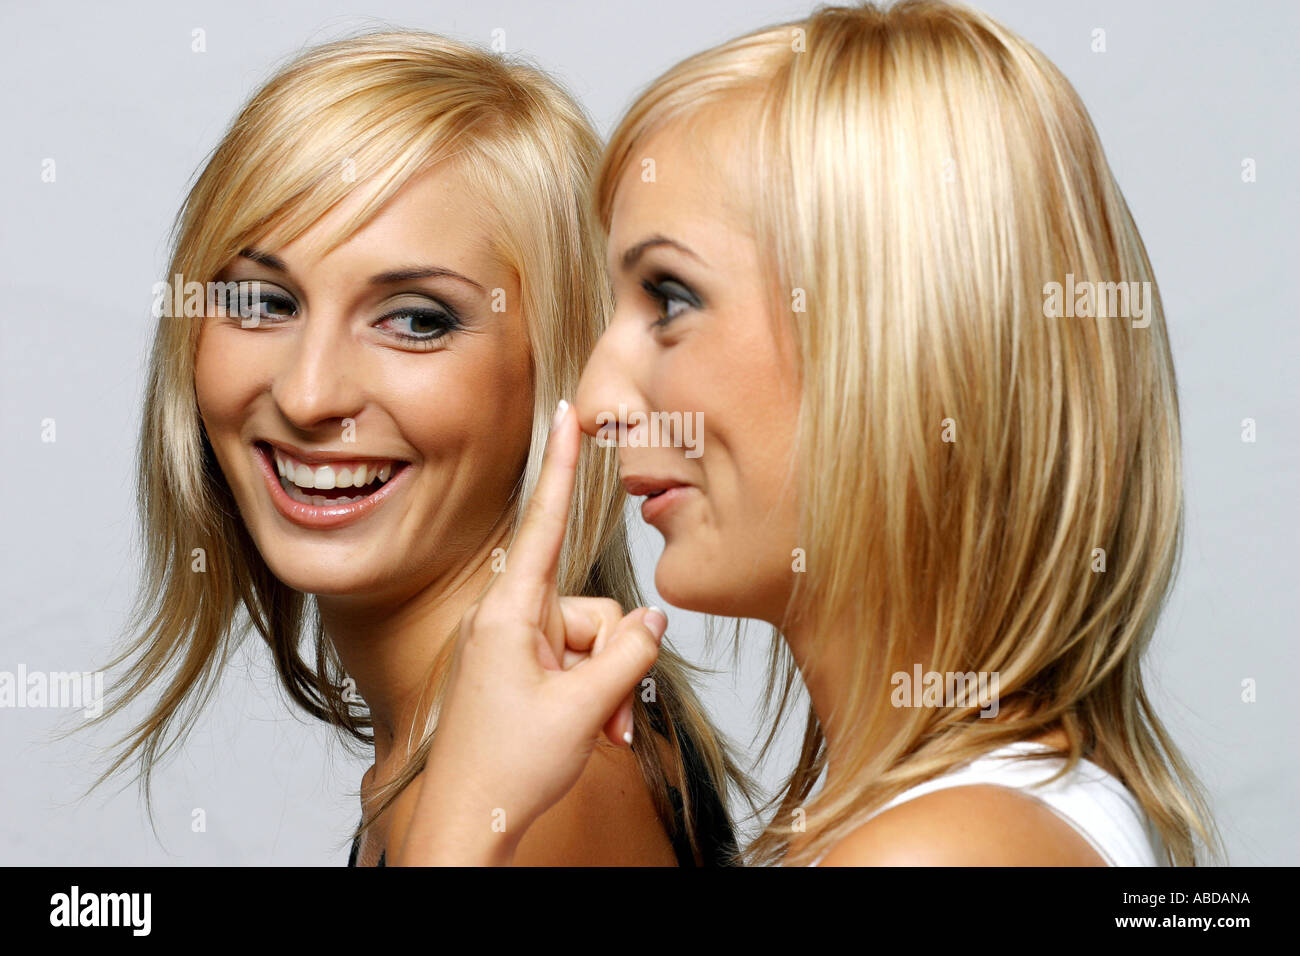 Twins amuse themselves Stock Photo